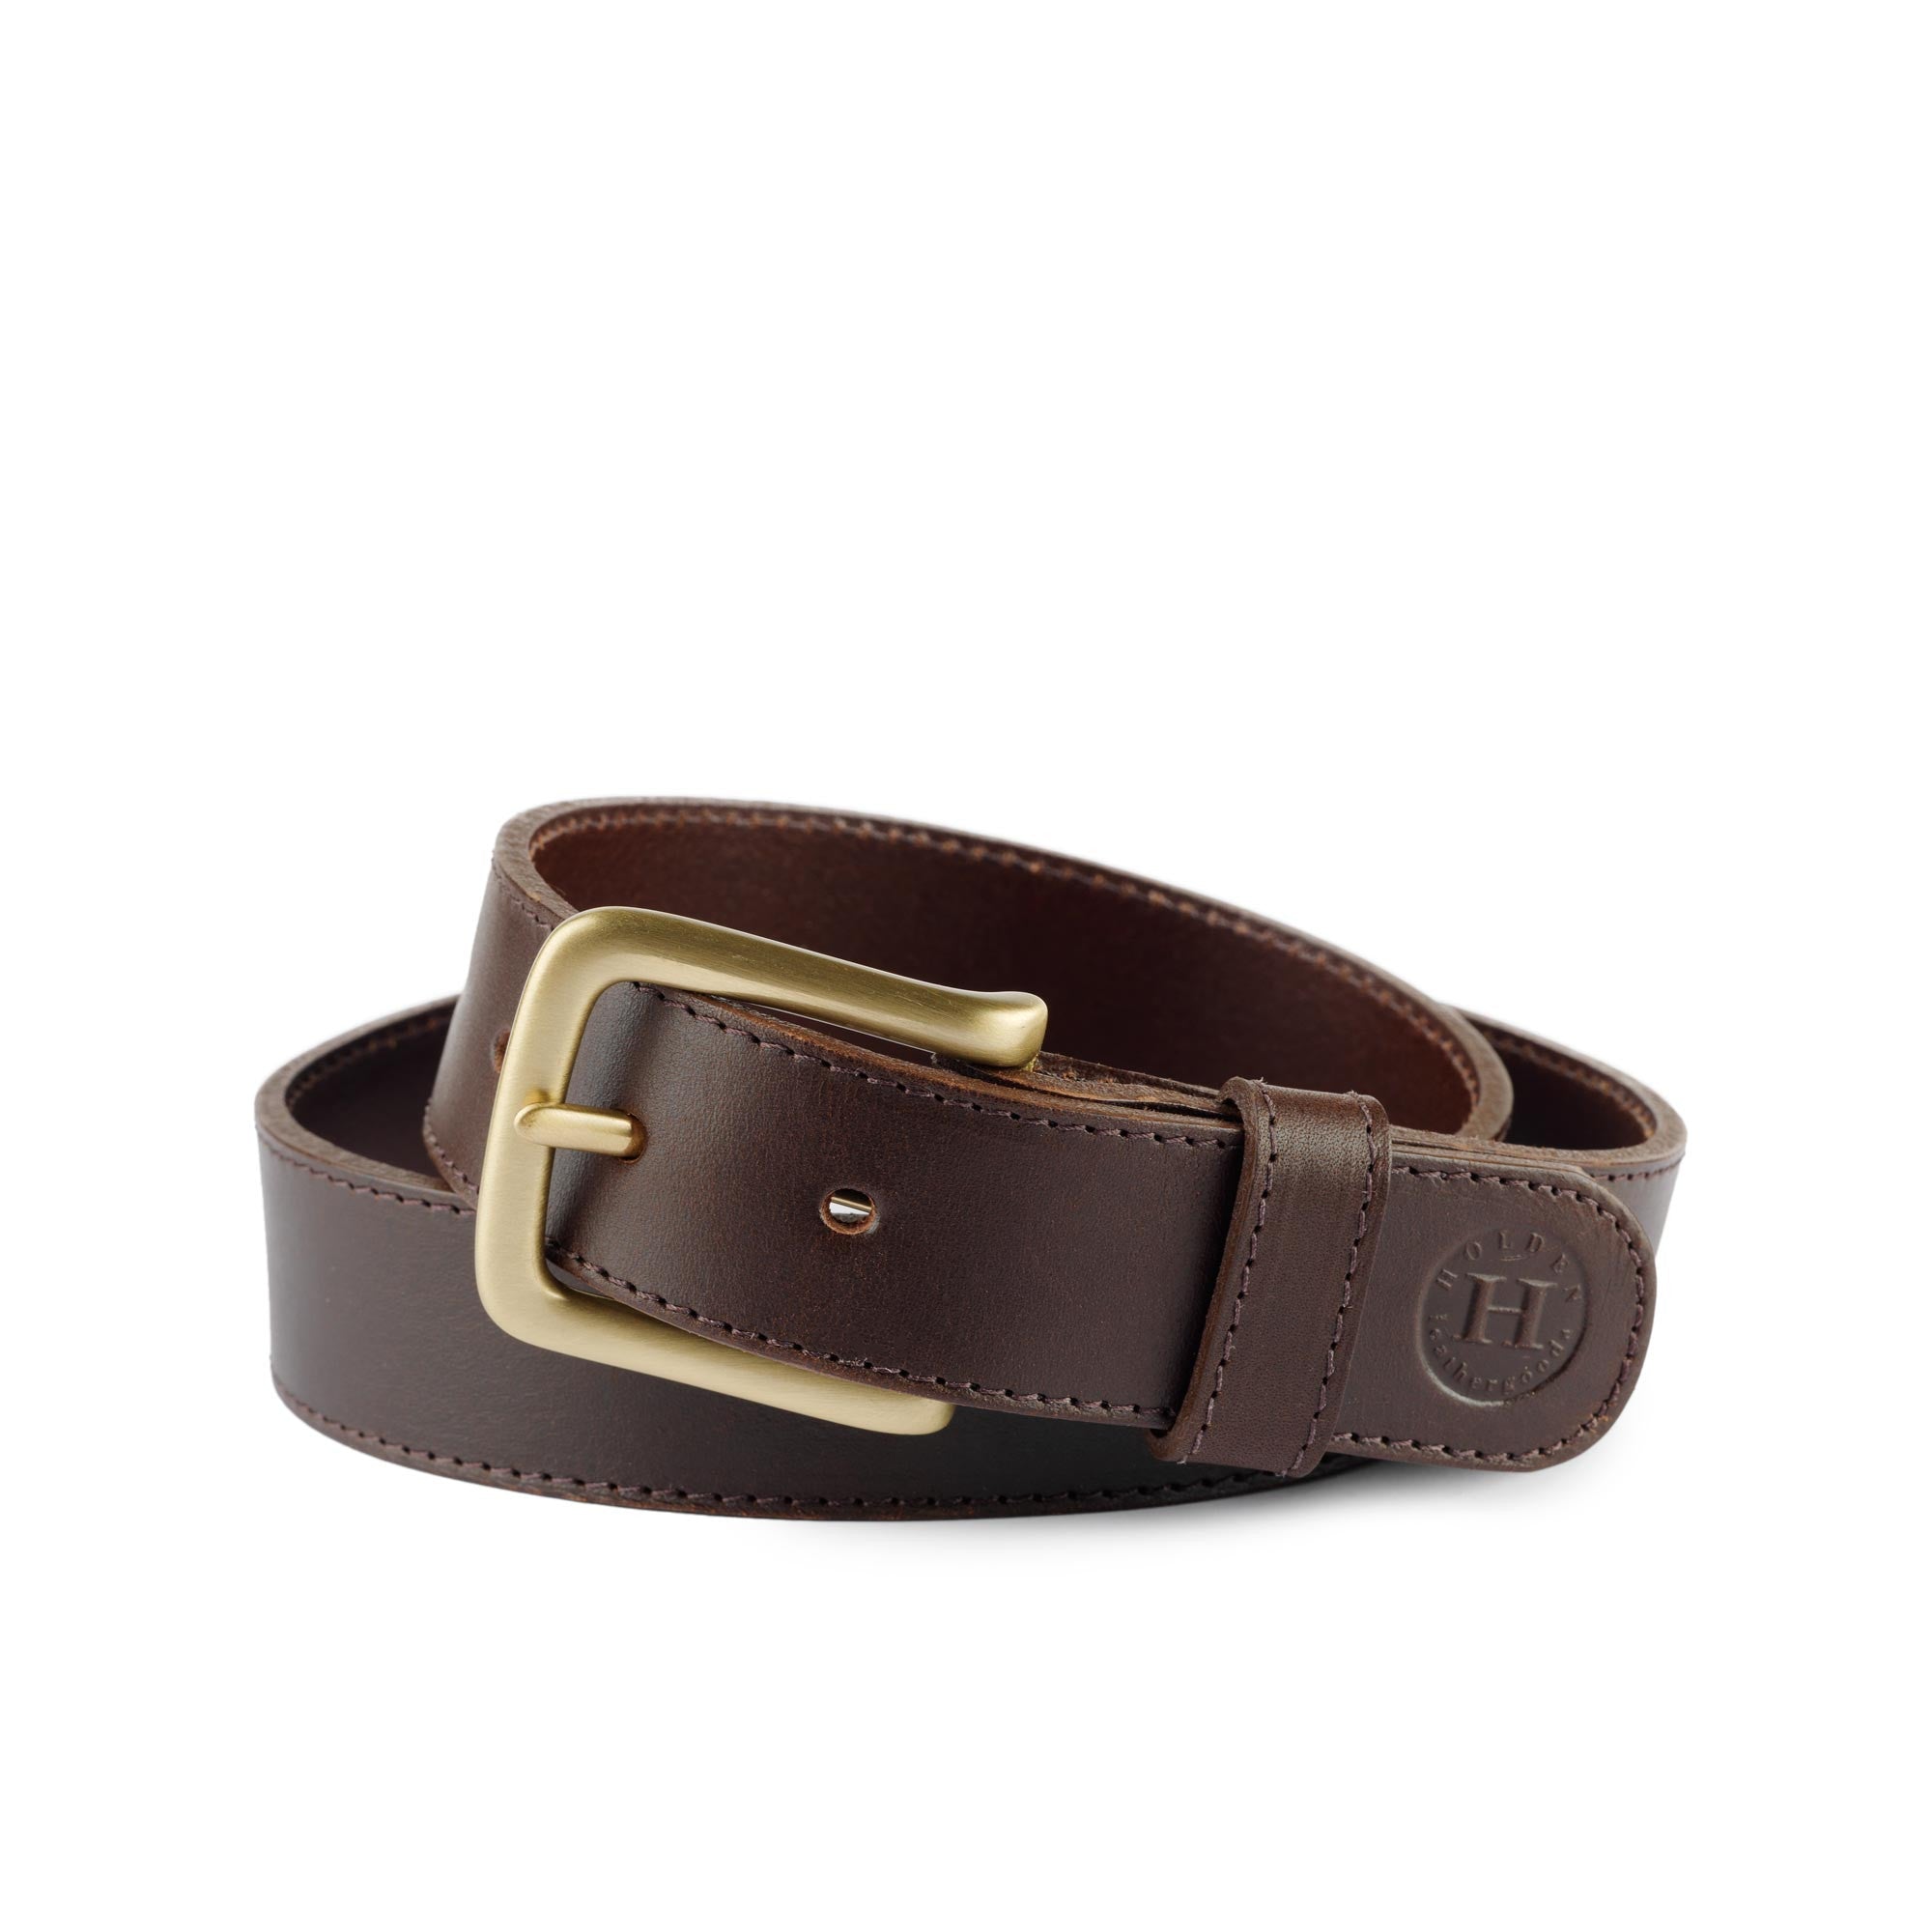 Holden Casual Leather Belt CB2 Brown - Holden Leathergoods, leather bags handmade in Ireland